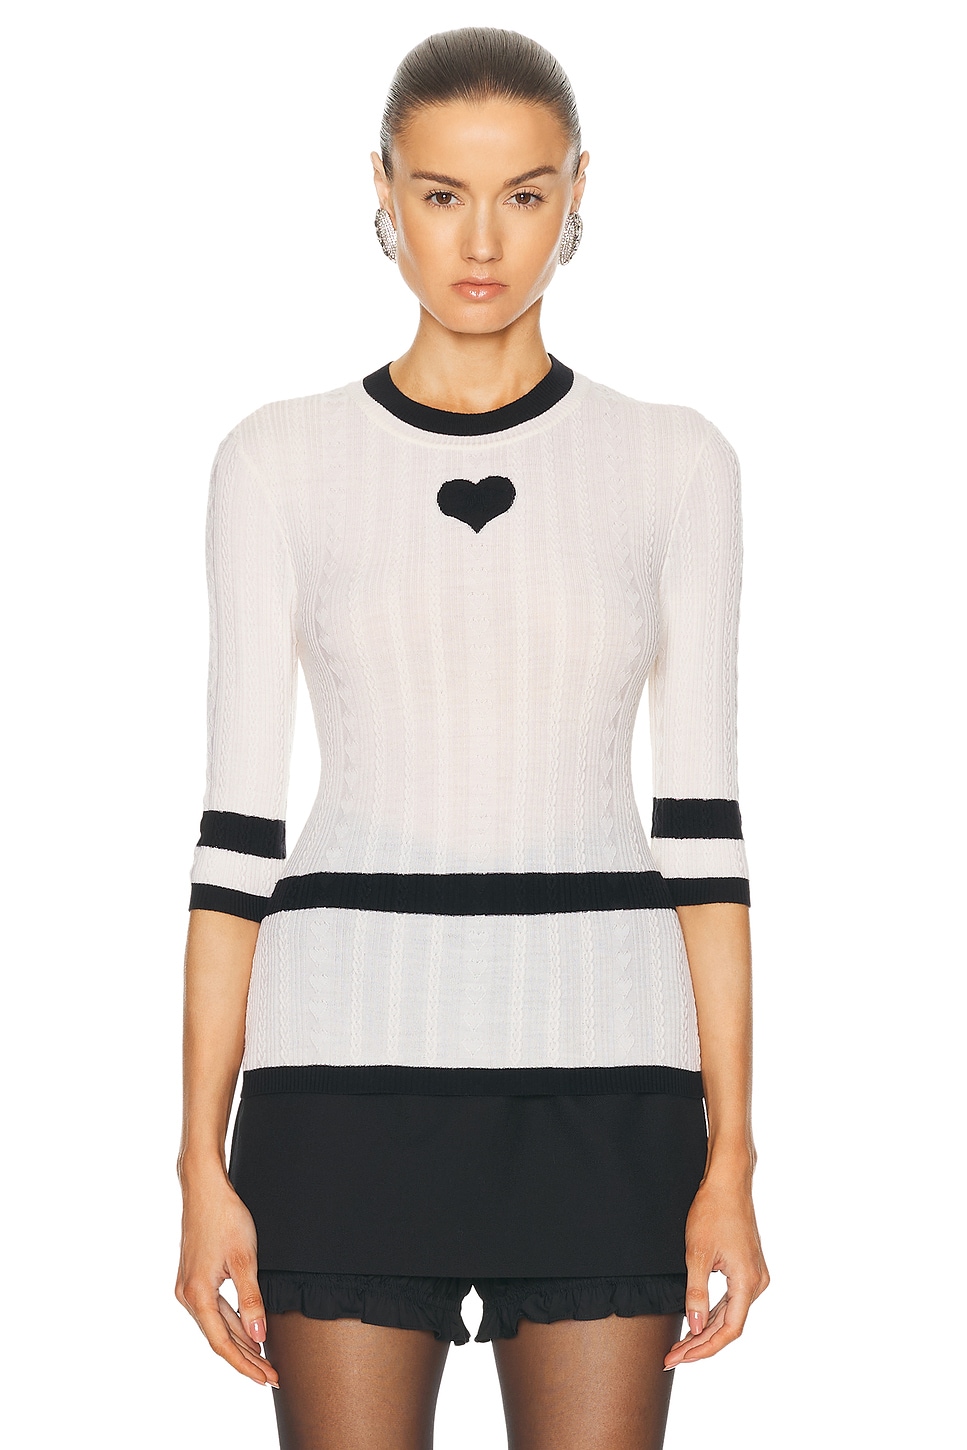 Image 1 of FWRD Renew Chanel Coco Mark Heart Knit Top in White